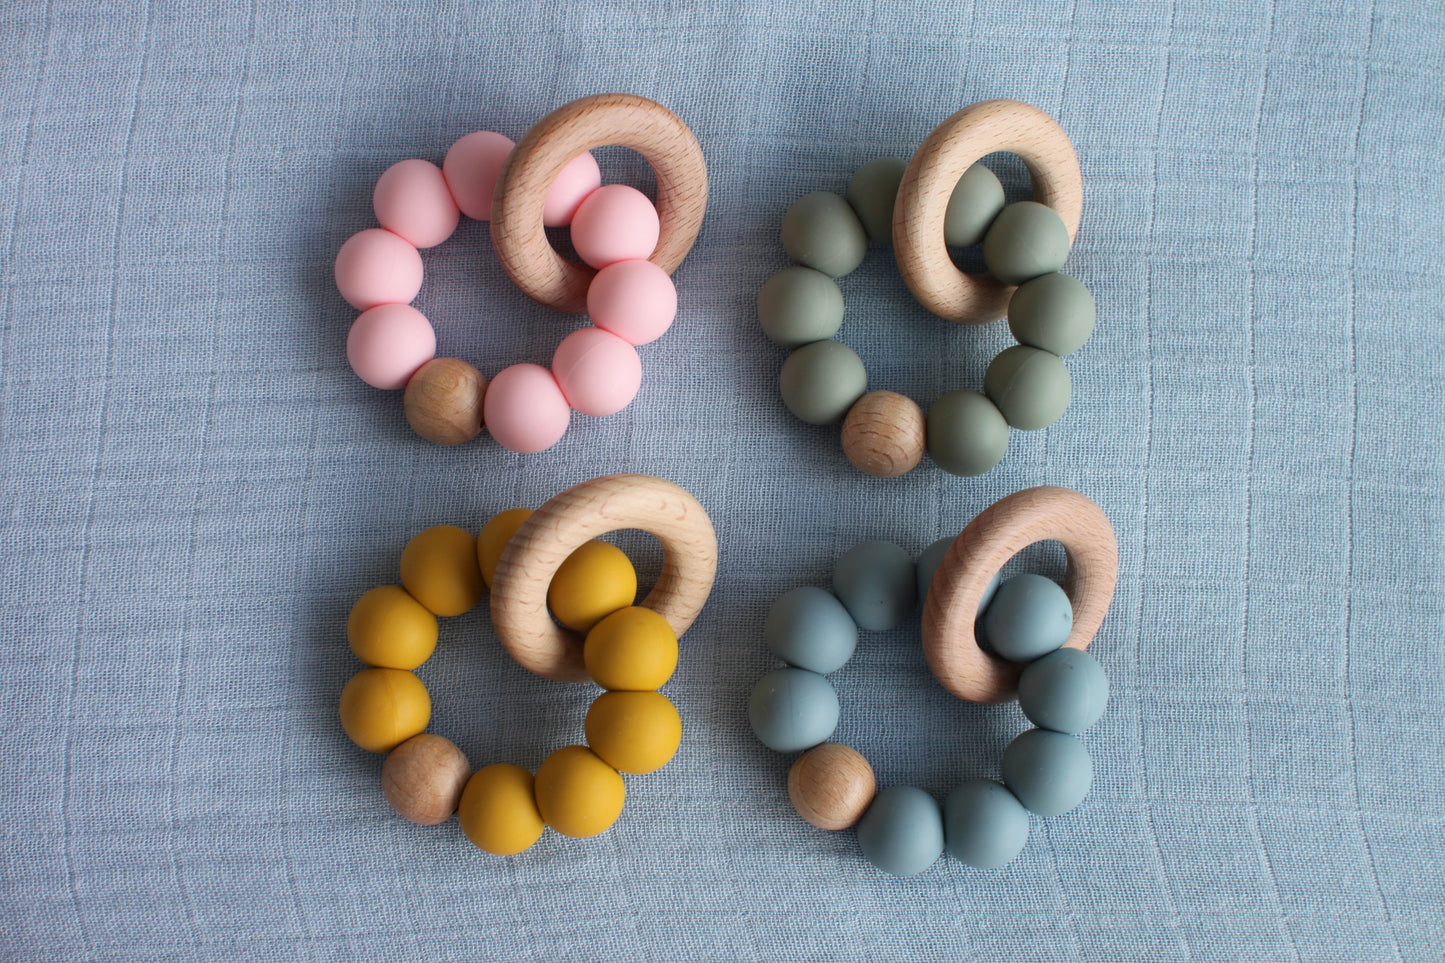 Four teethers made from silicone and beech wood are pictured. The colours of the beads are pink, green, blue and yellow (moving clockwise from the top left corner). 